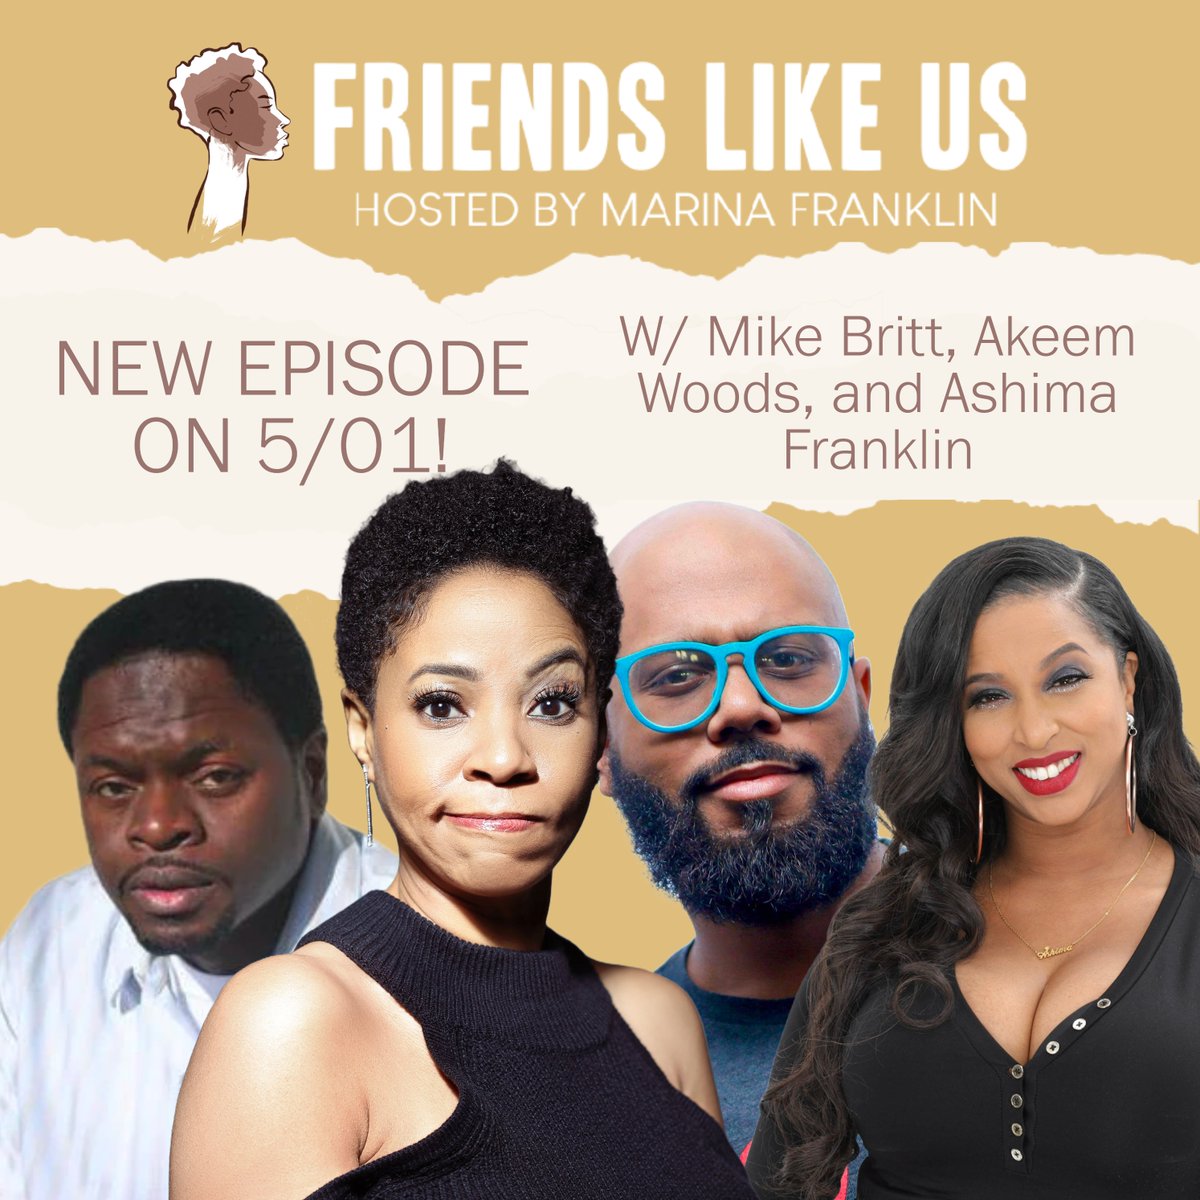 #NewEpisode tomorrow with special guests @MIKEBRITTBK @WoodsAkeem @AshimaFranklin and amazing host @marinayfranklin! Make sure to leave us five stars on #ApplePodcasts, #Stitcher, or #Spotify ! #CheckUsOut and #subscribe here! ✨ ow.ly/q8Jk50KvRqM